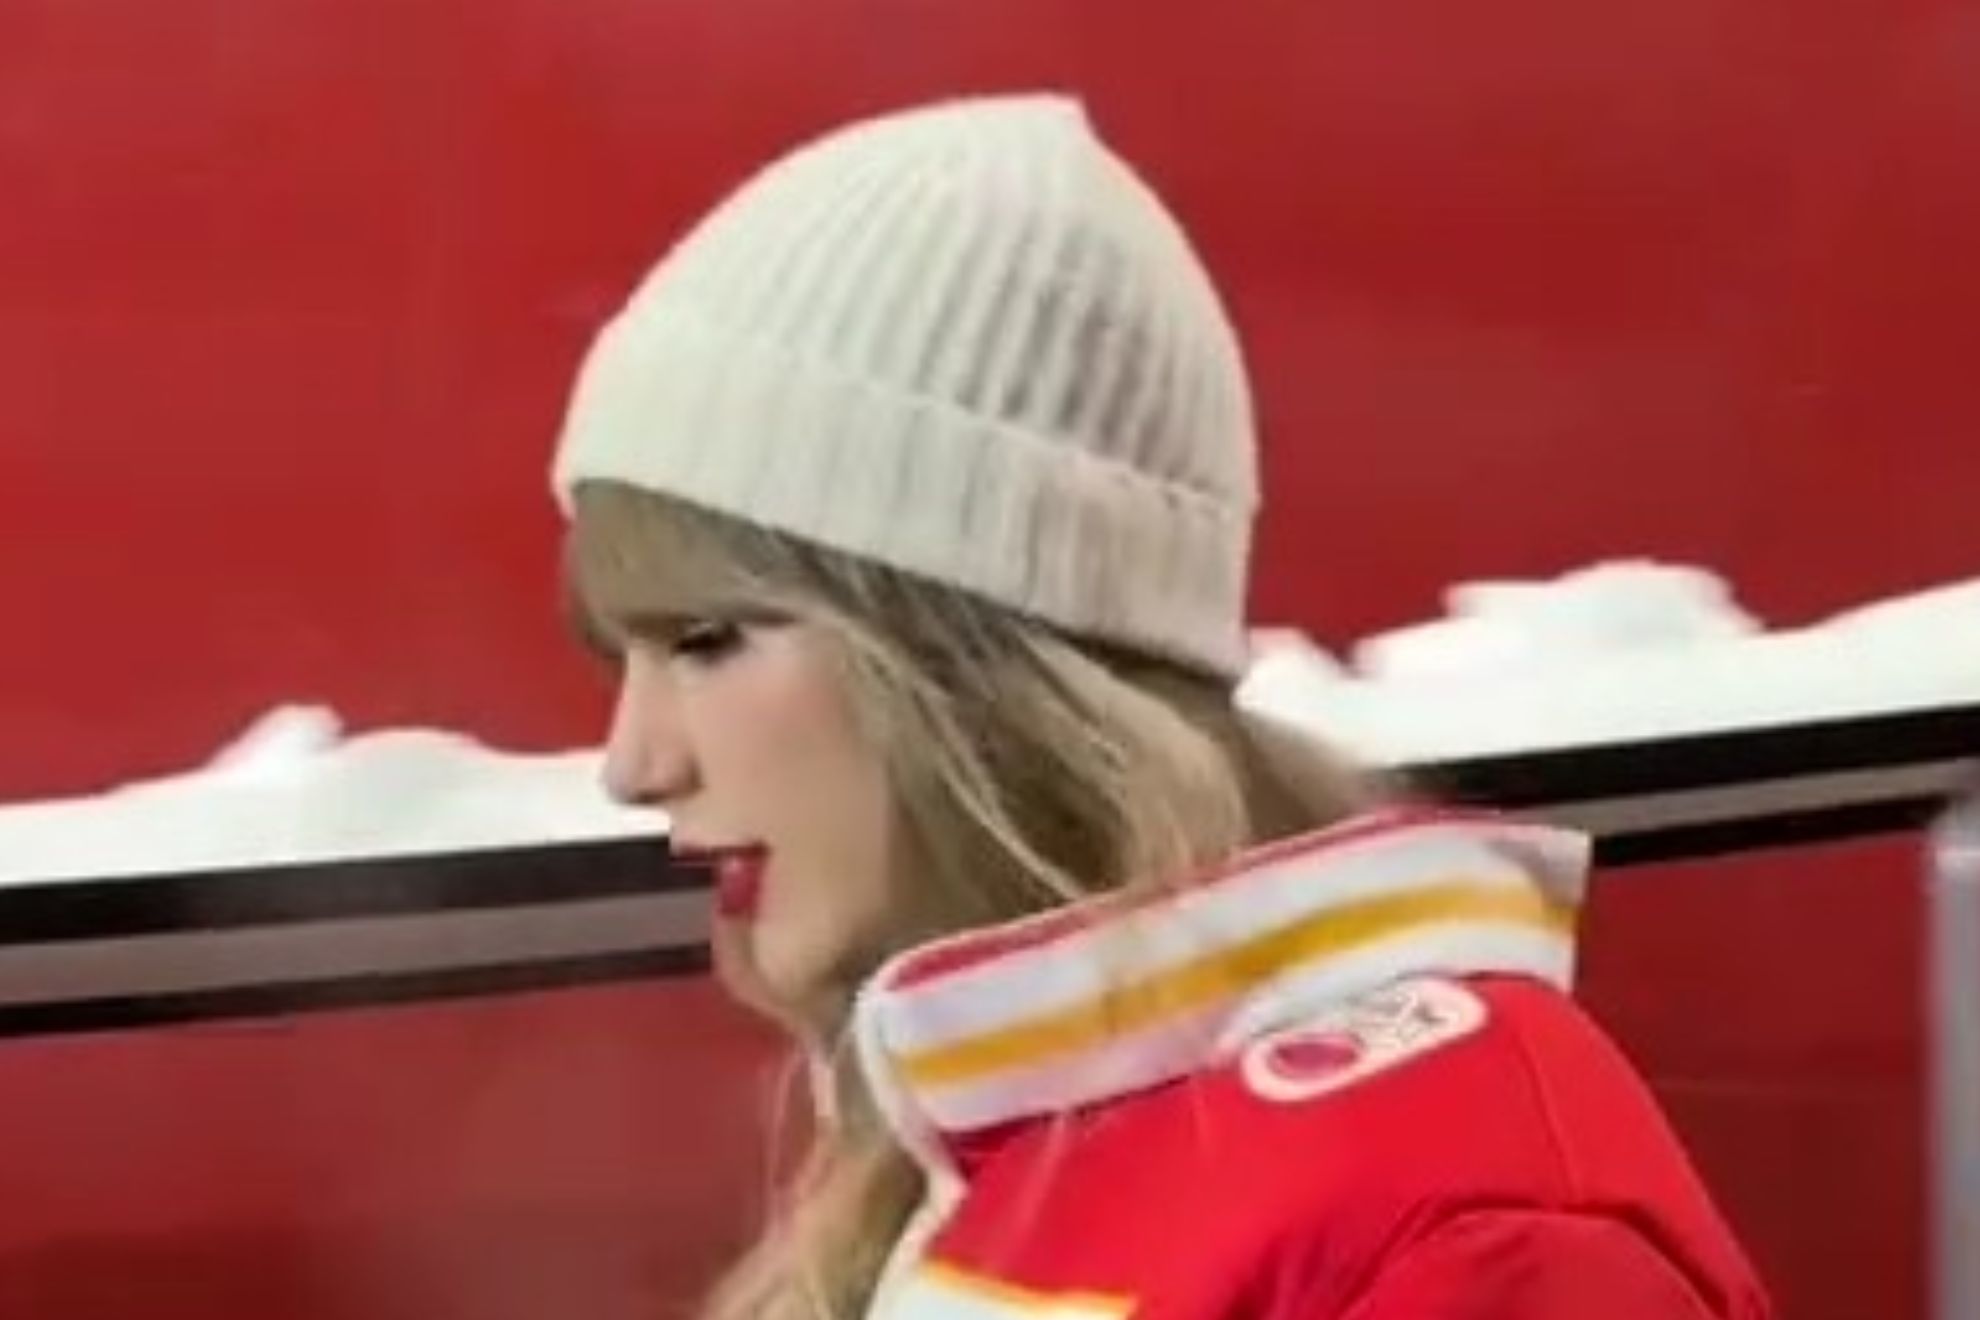 Taylor Swift arrived to Arrowhead Stadium on Saturday night donning an oversized coat.